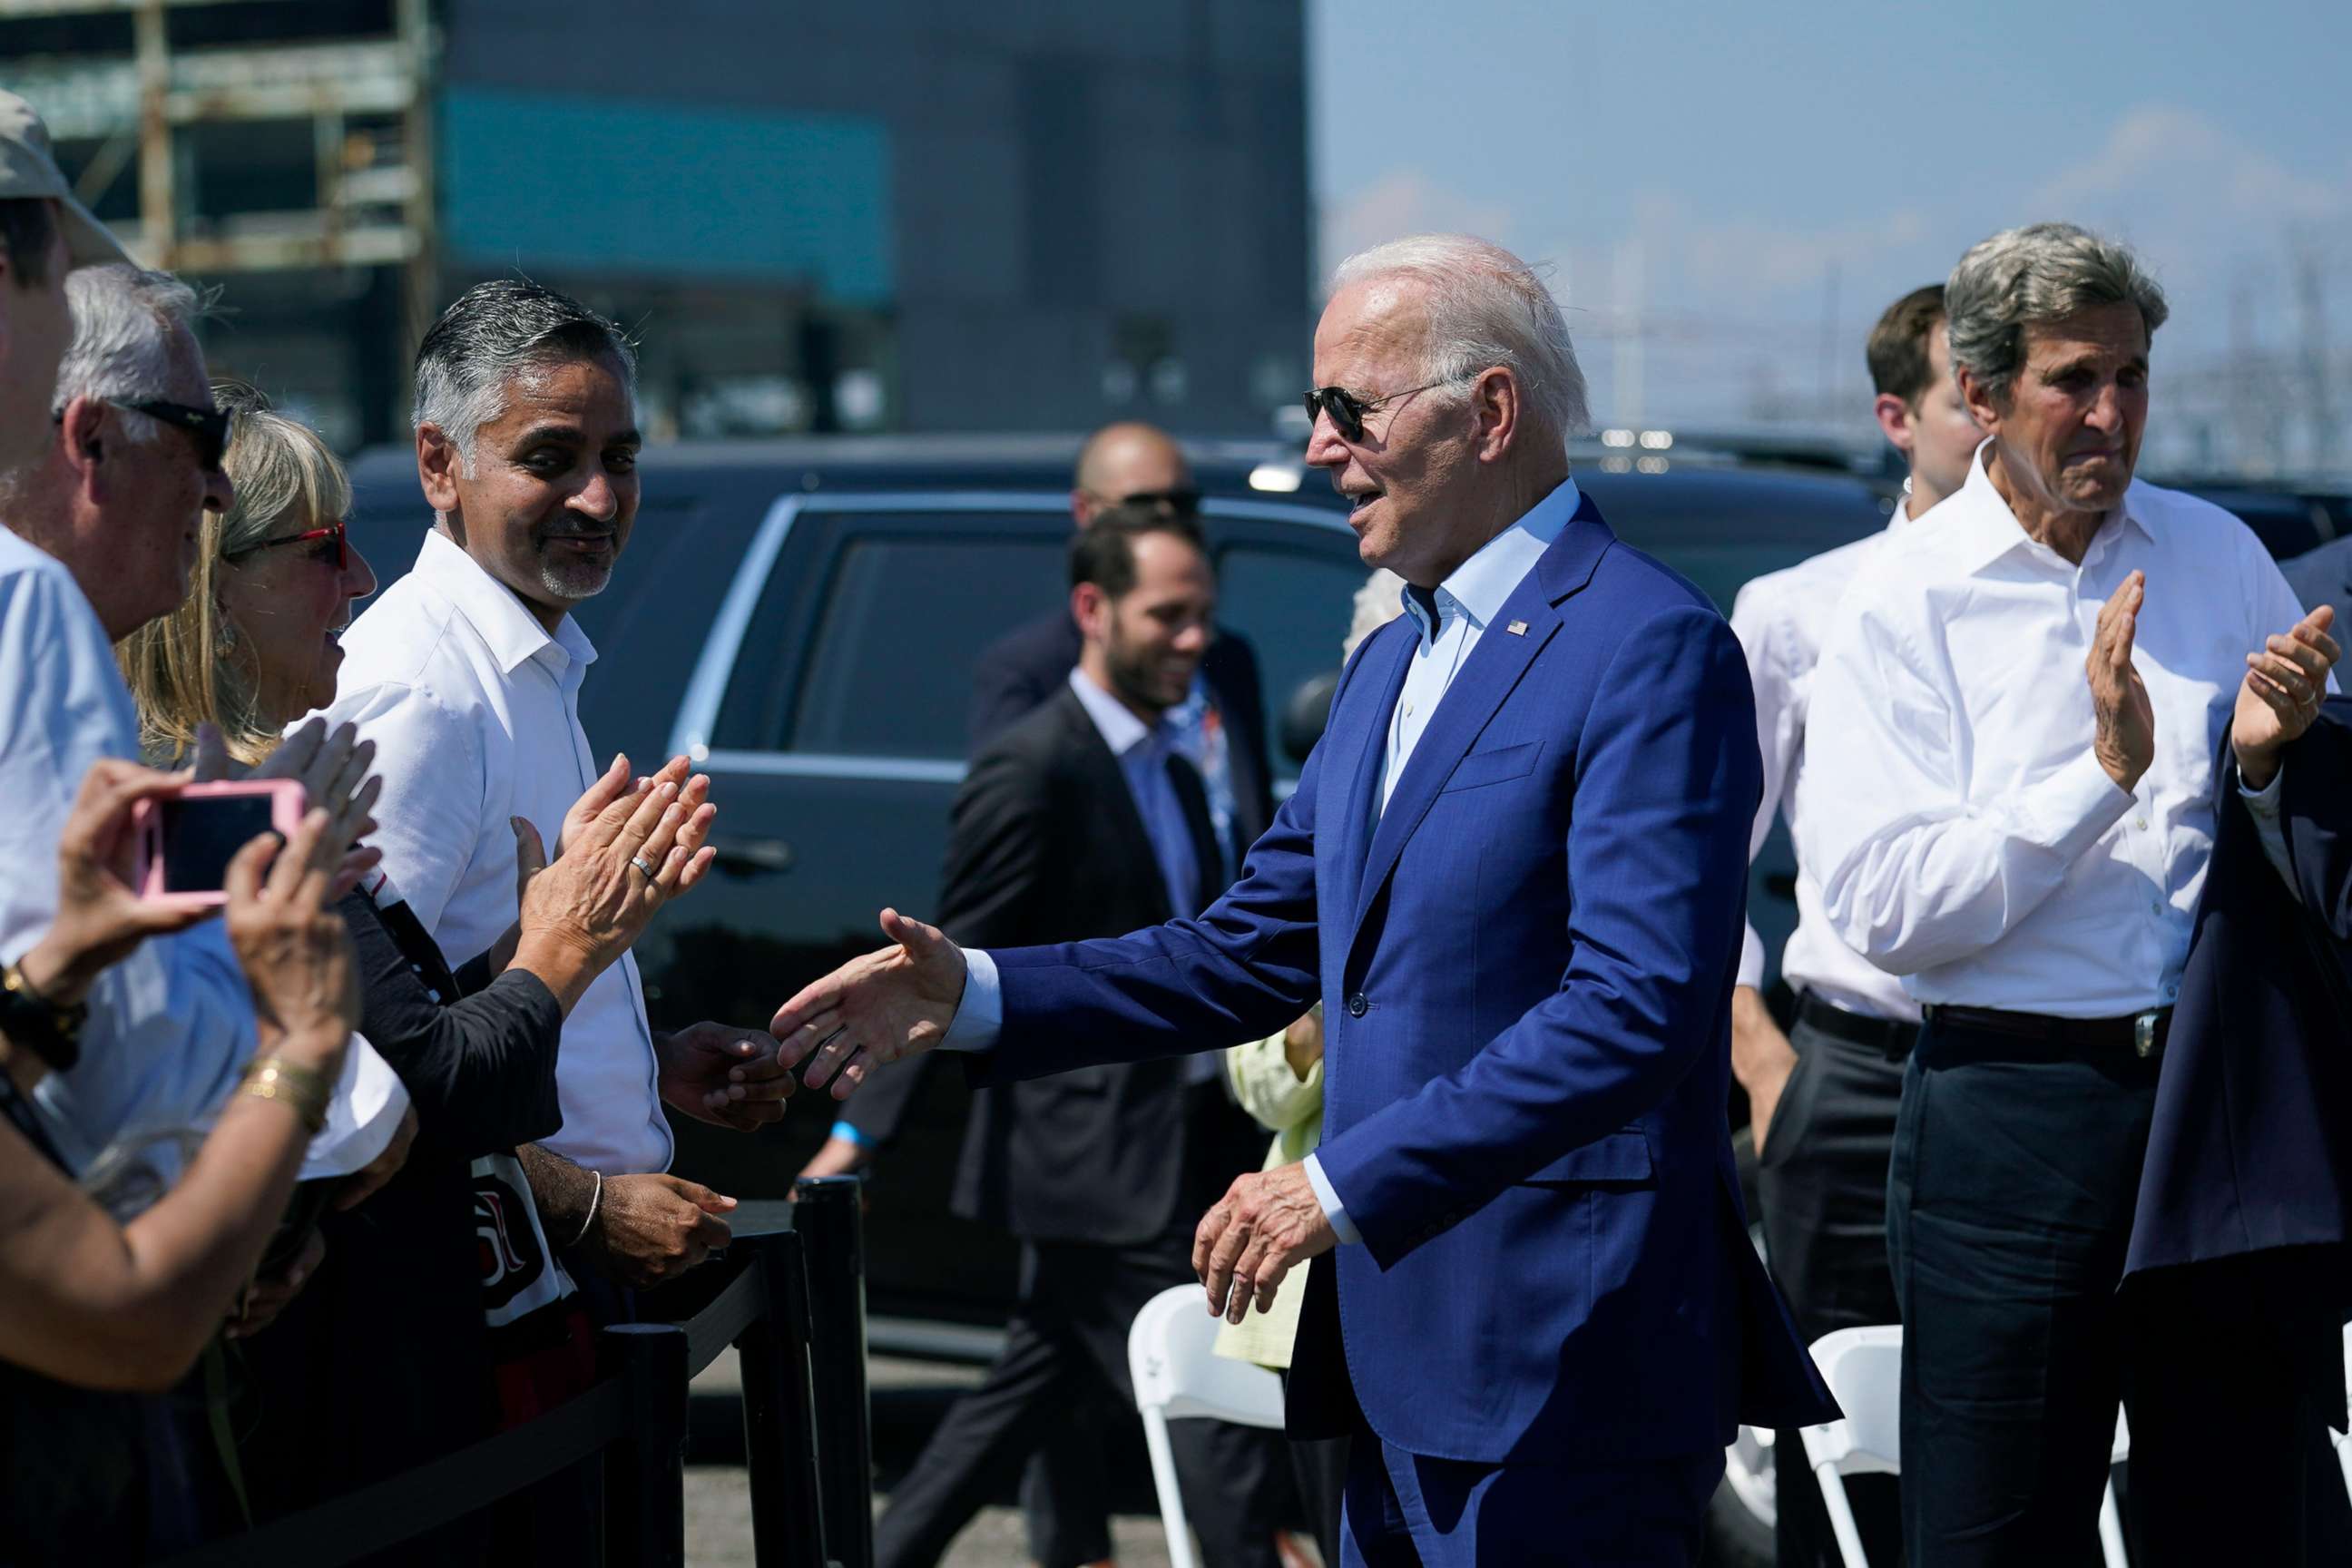 PHOTO: President Joe Biden greets people after speaking about climate change and clean energy at Brayton Power Station, July 20, 2022, in Somerset, Mass.